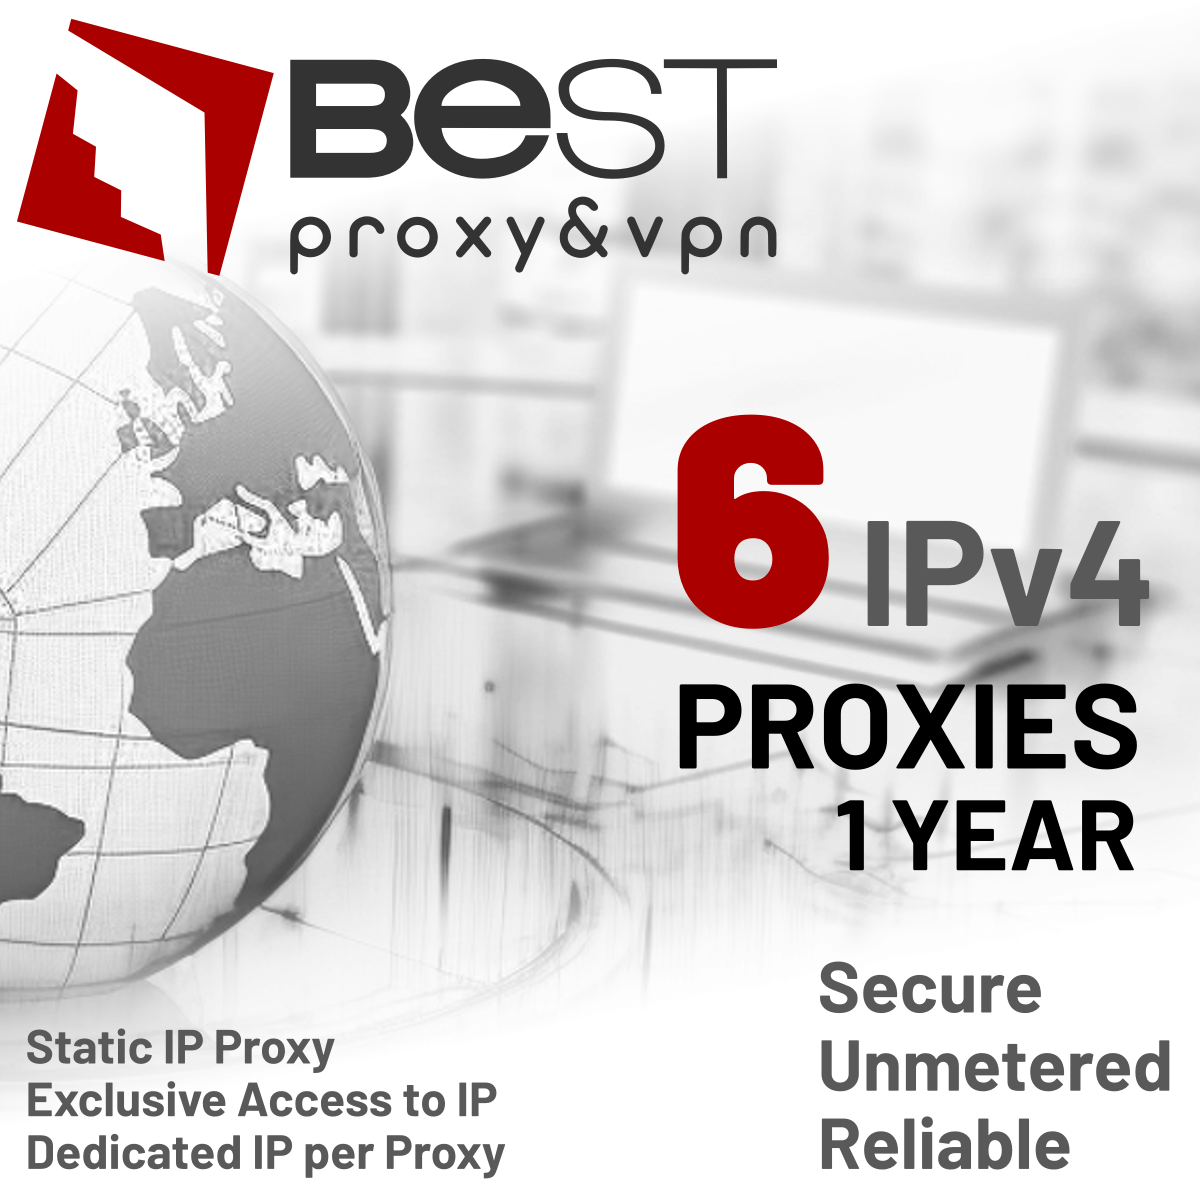 6 Private Proxies for 1 Year